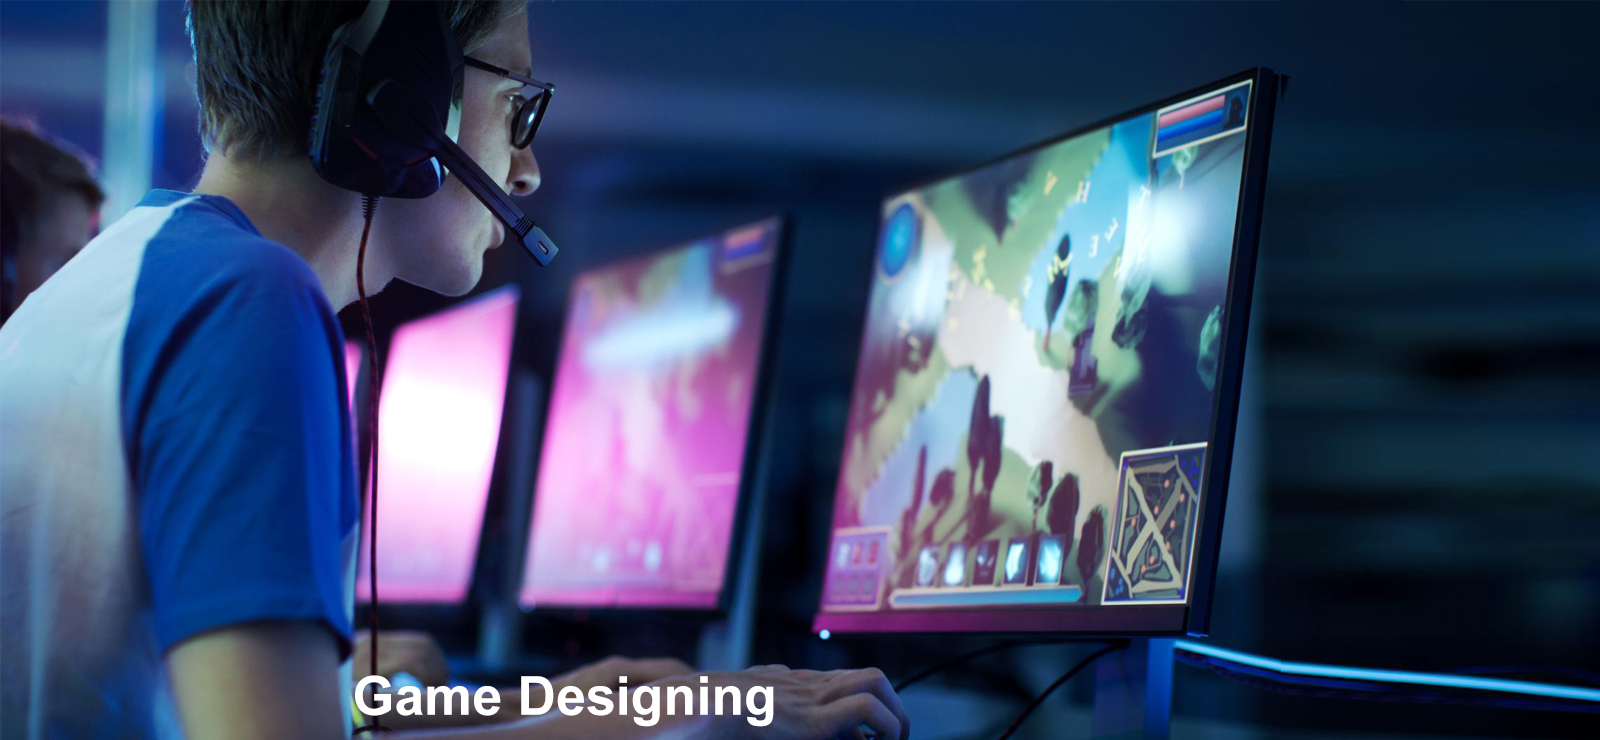 Games Design Training Course in Chandigarch Mohali Mohali Panchkula